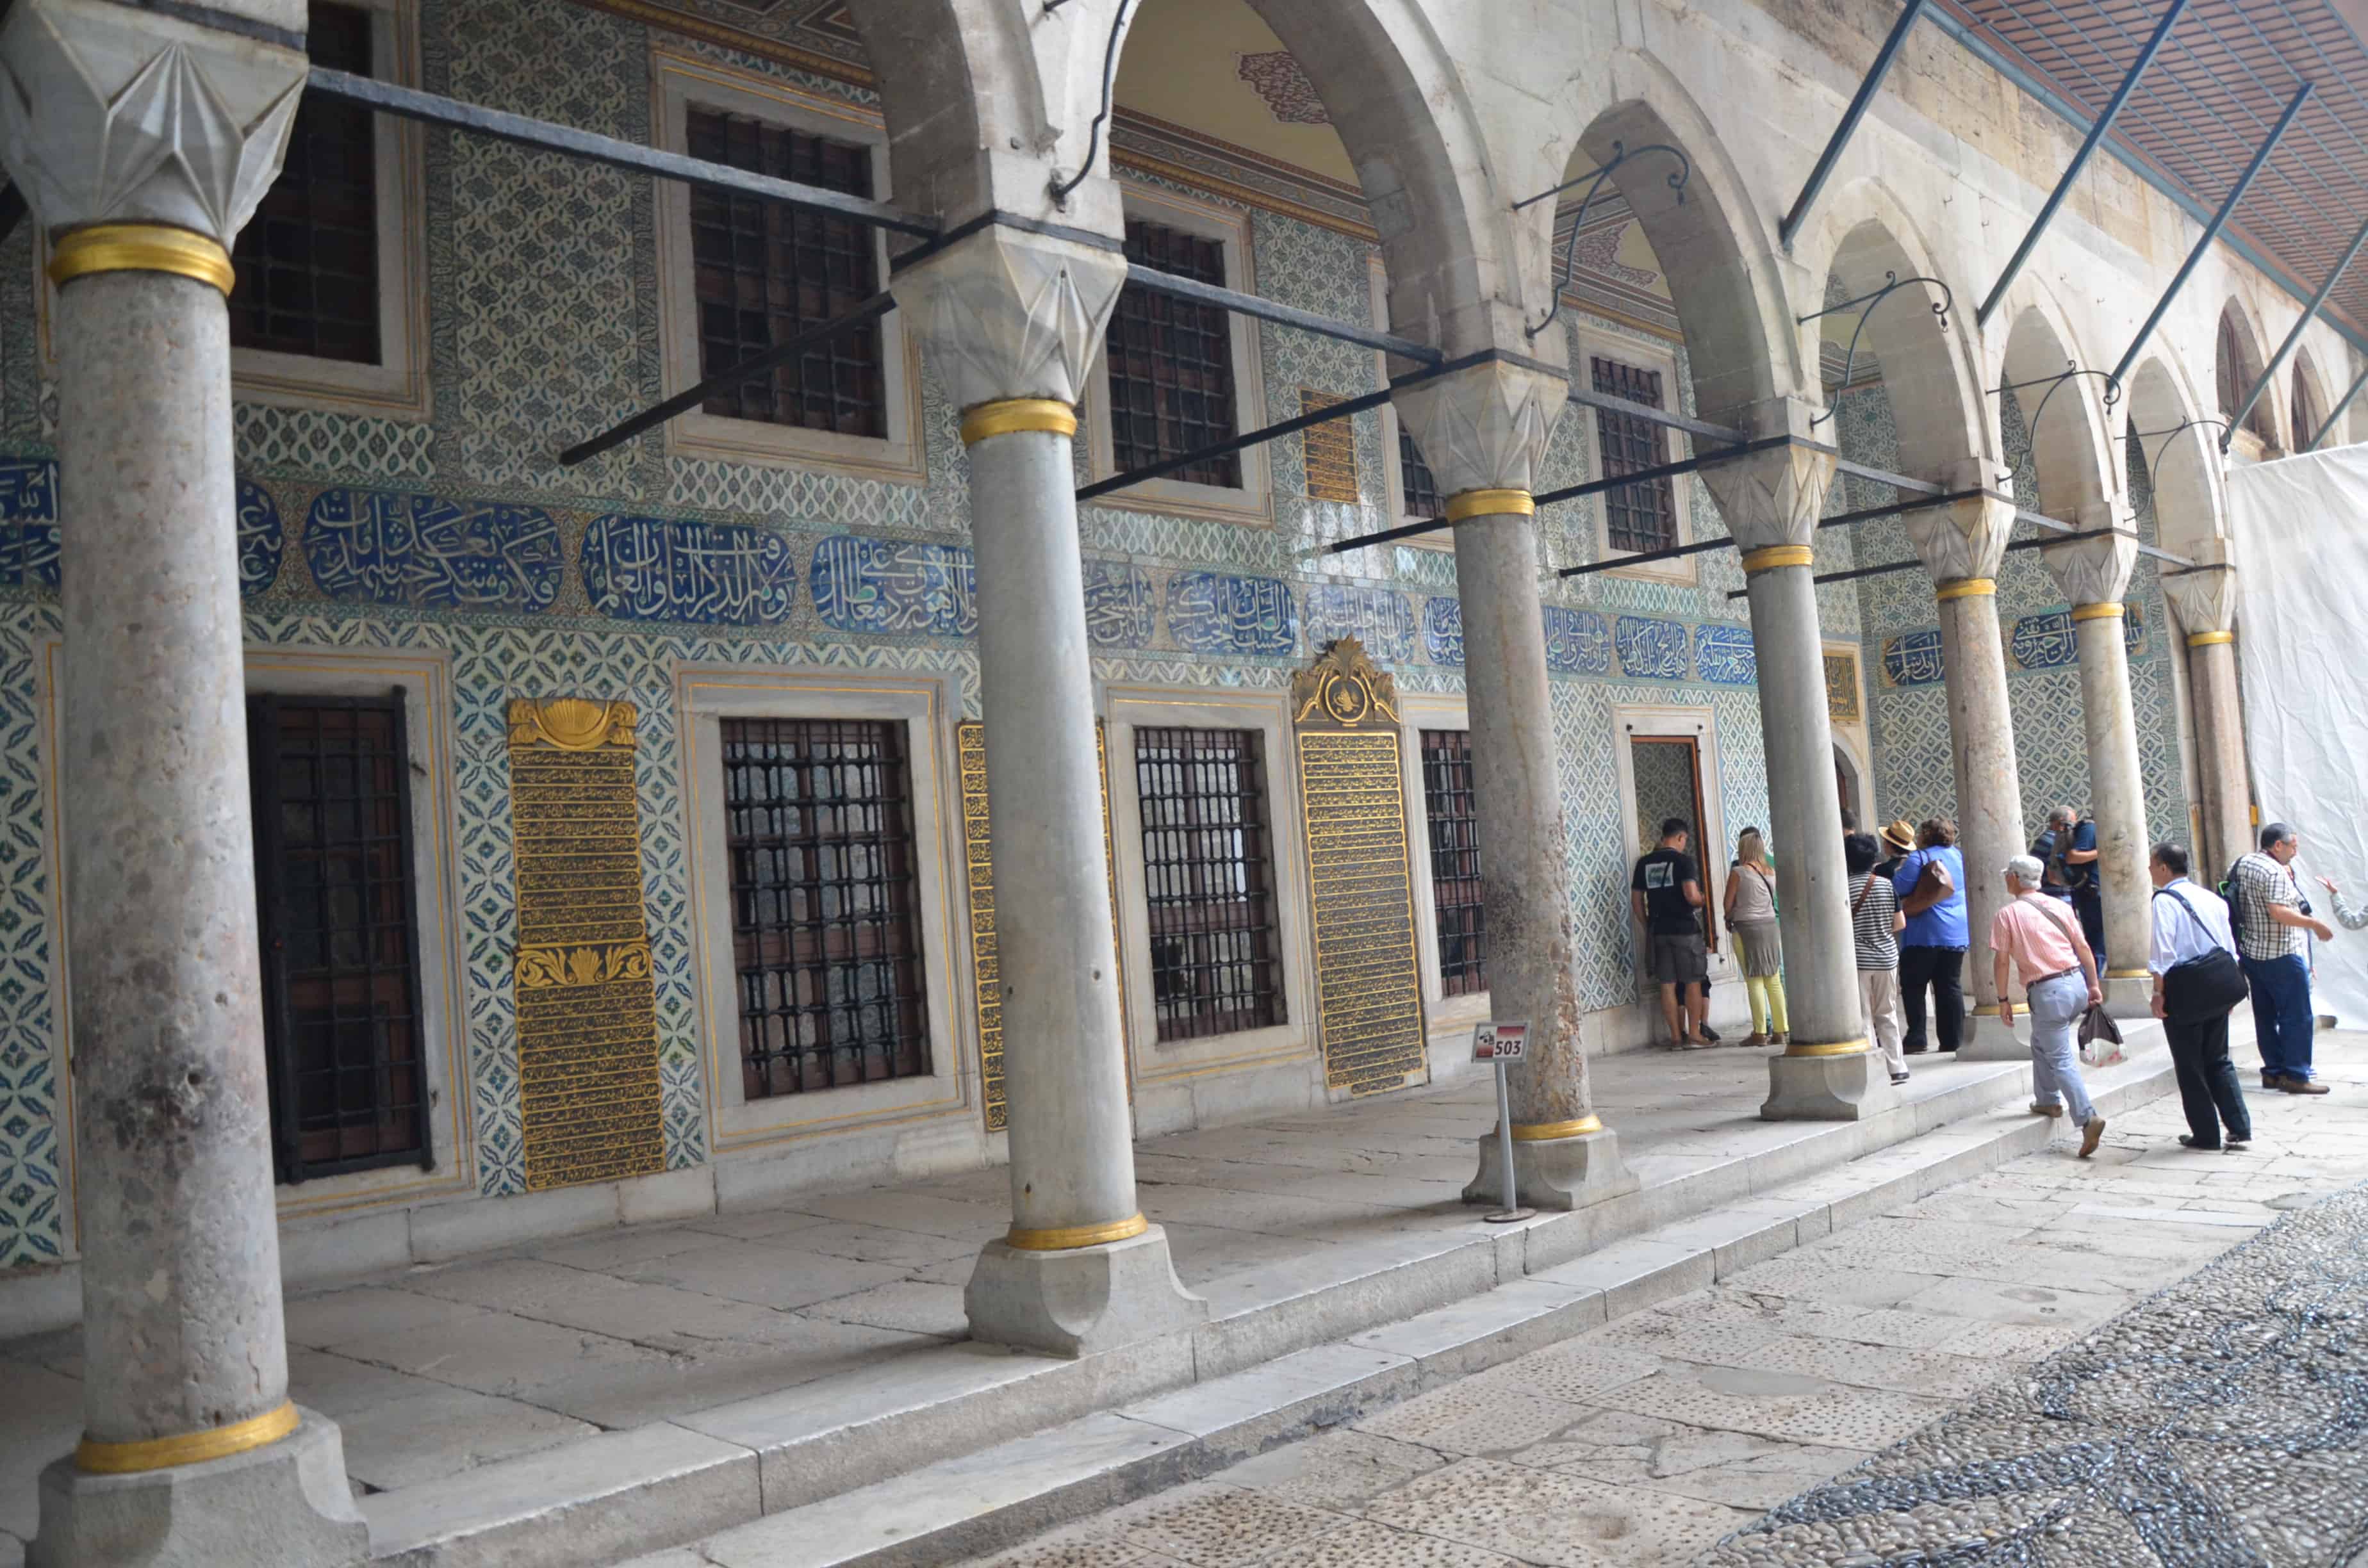 Apartments of the Black Eunuchs in the Imperial Harem at Topkapi Palace in Istanbul, Turkey